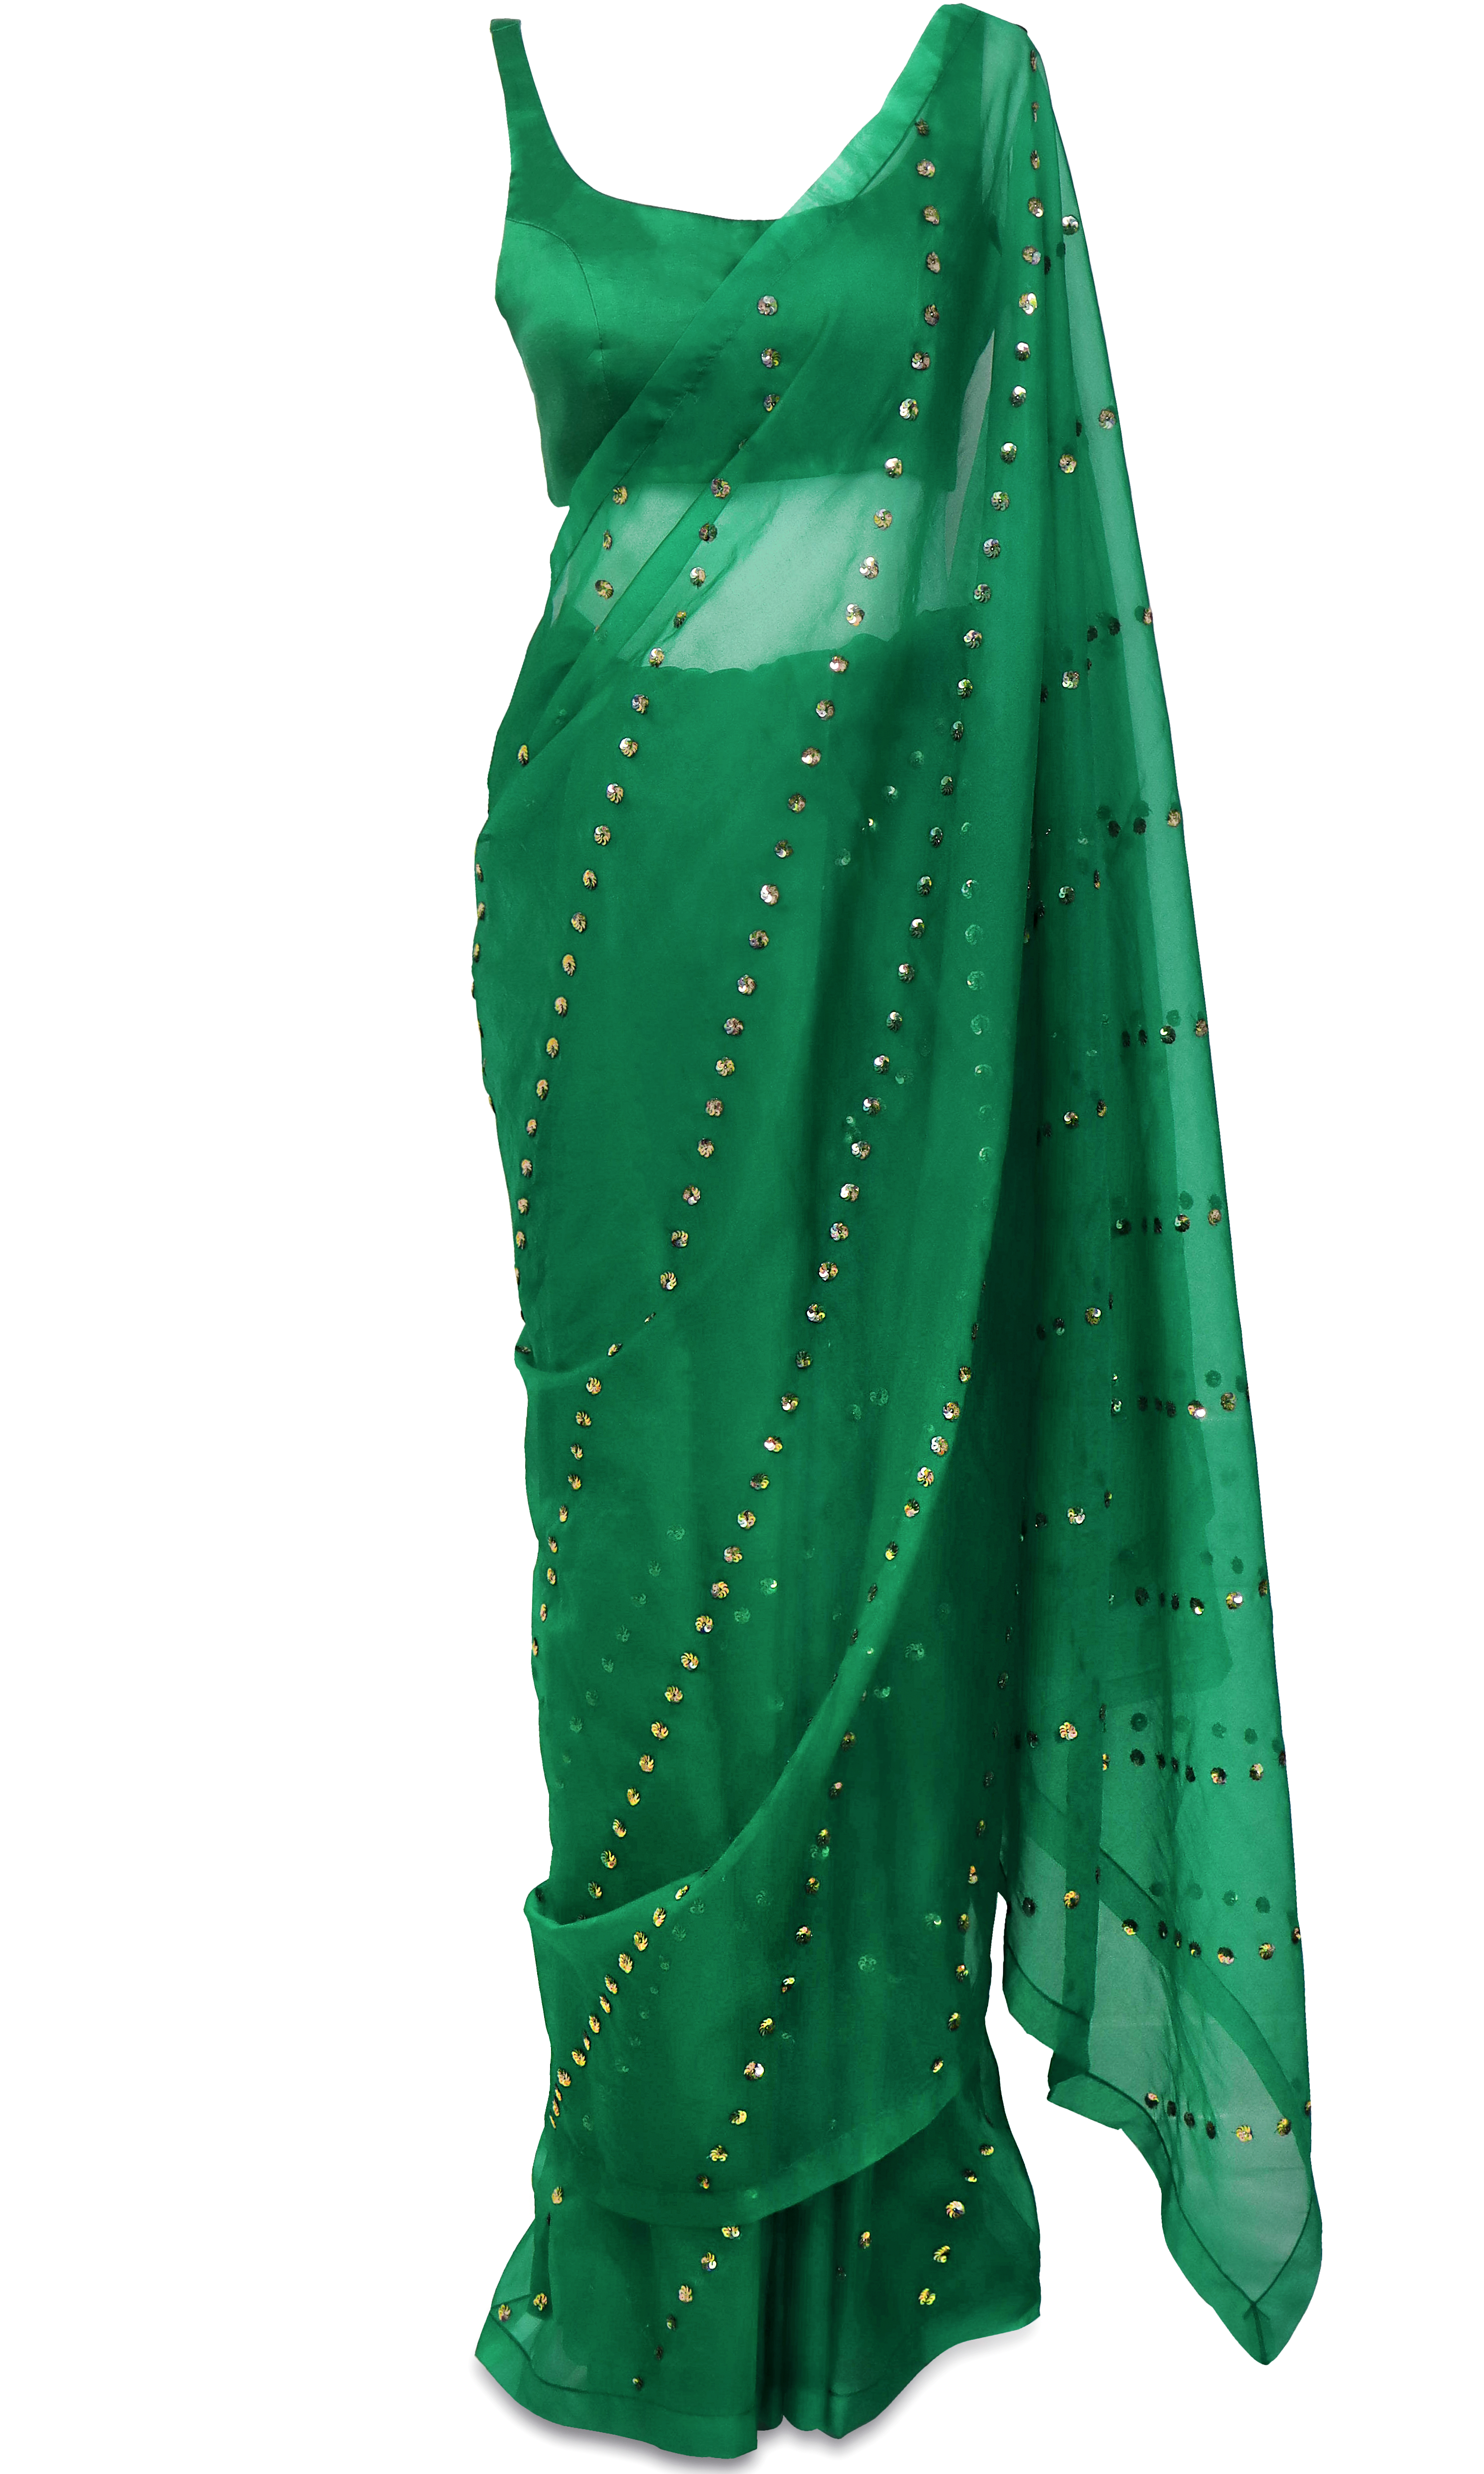 Pre-stitched emerald green saree features a silk organza base with 3D gold sequins embroidery